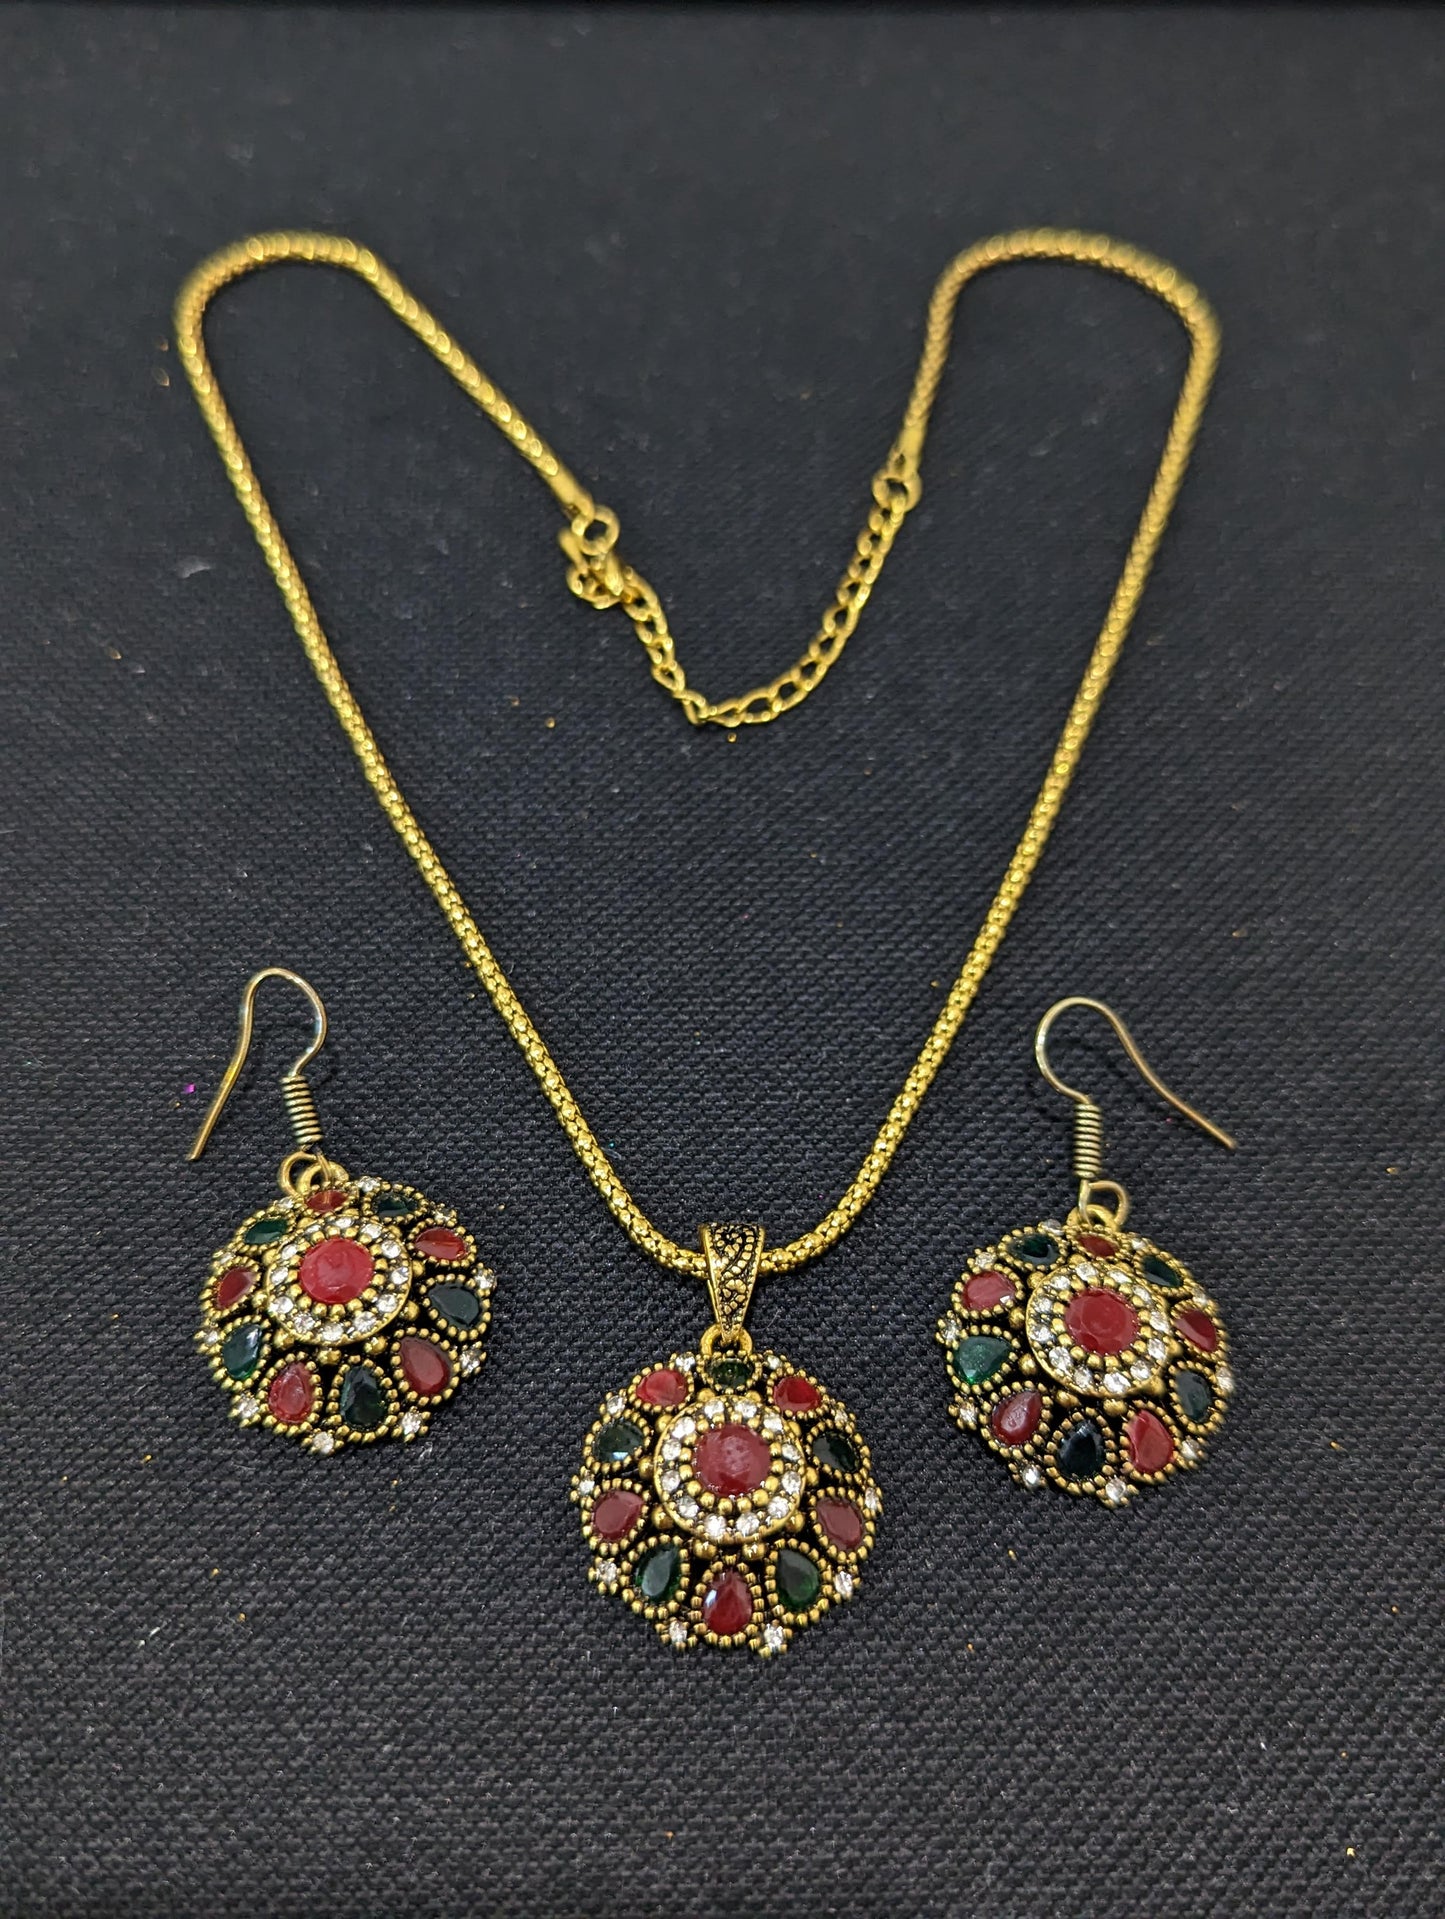 Antique gold plated pendant chain necklace and earring set